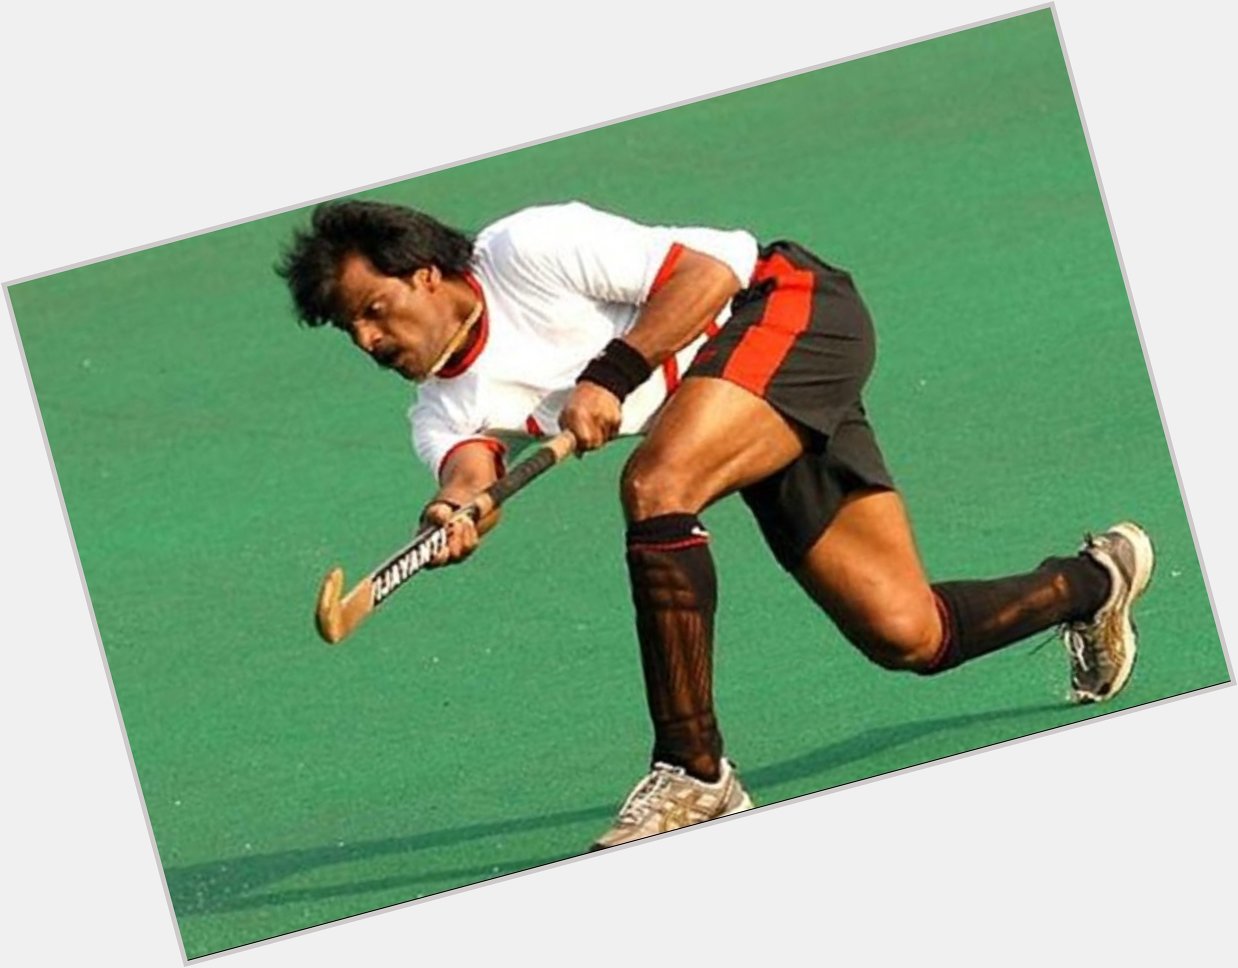 The man who deserves Bharat Ratna for for making India great in Hockey.
Happy Birthday Dhanraj Pillay 